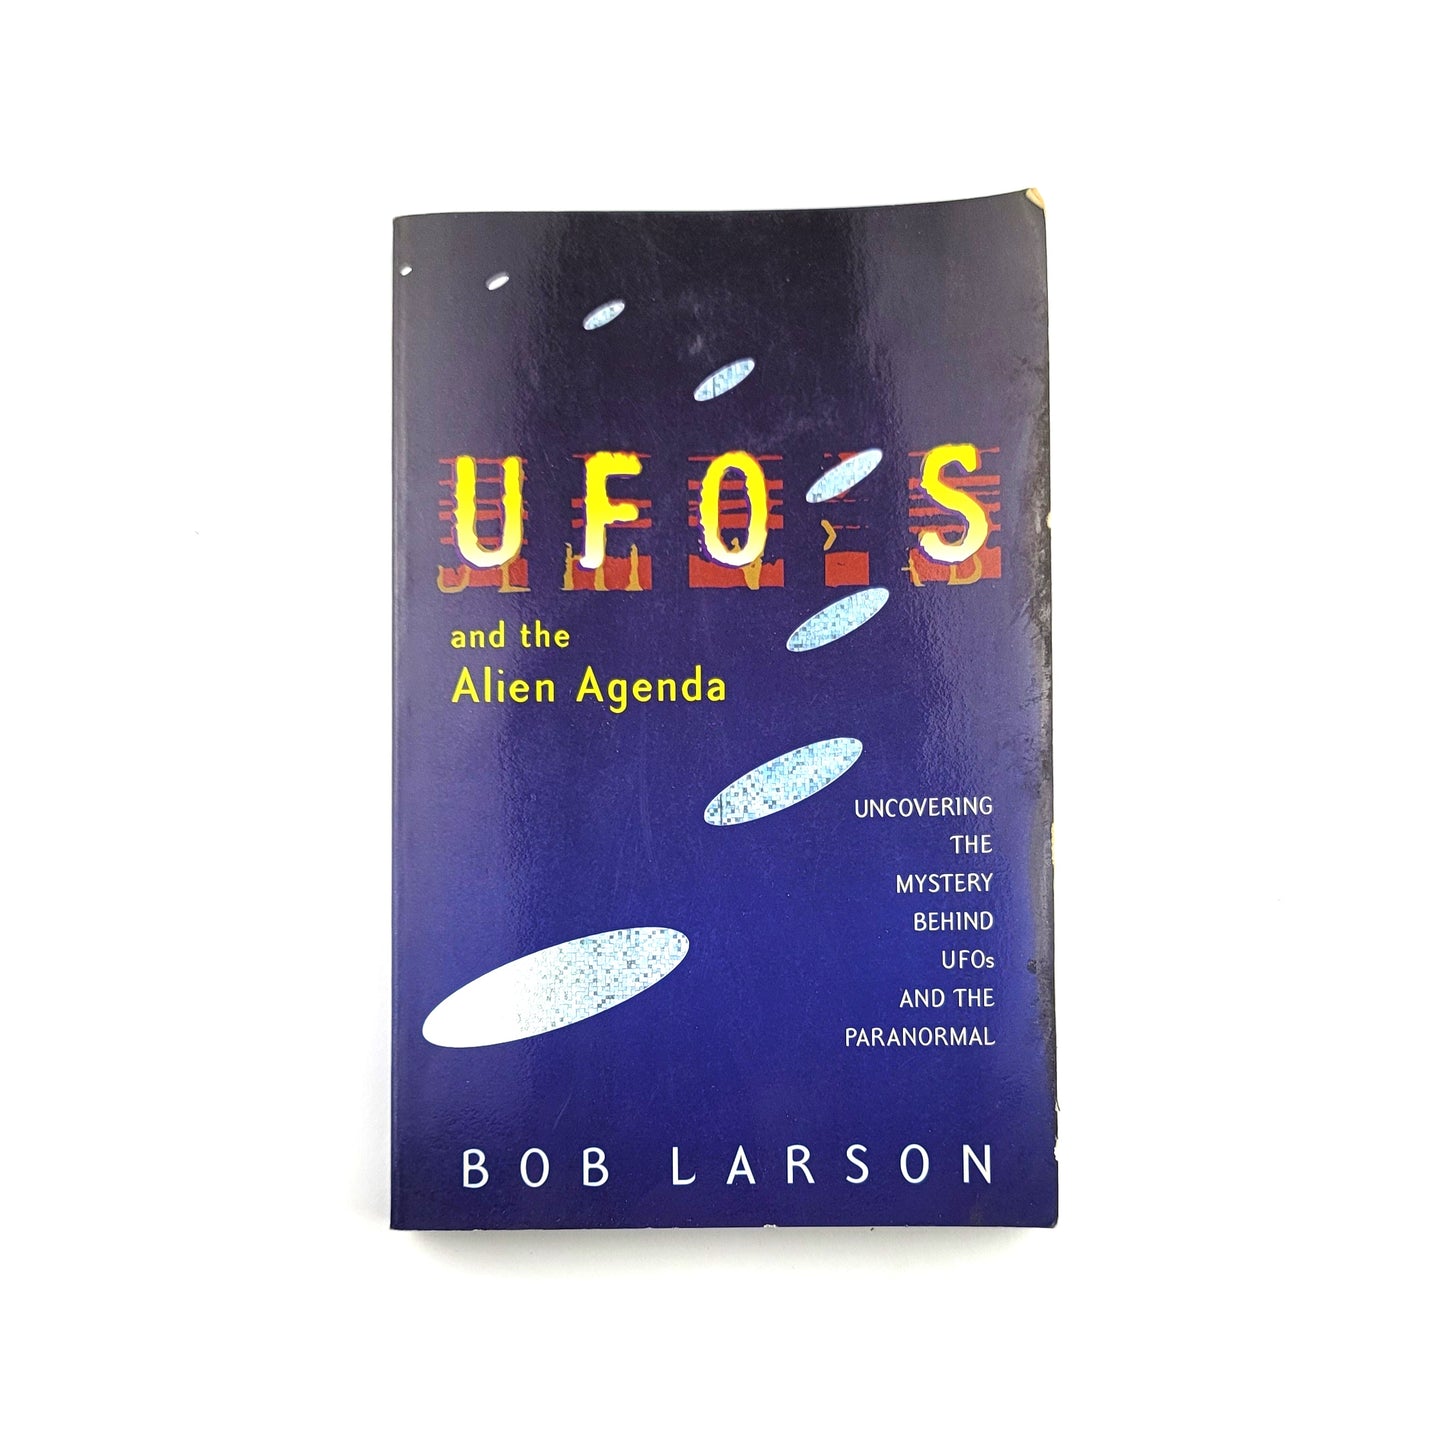 UFO's and the Alien Agenda: Uncovering the Mystery Behind UFOs and the Paranormal by Bob Larson